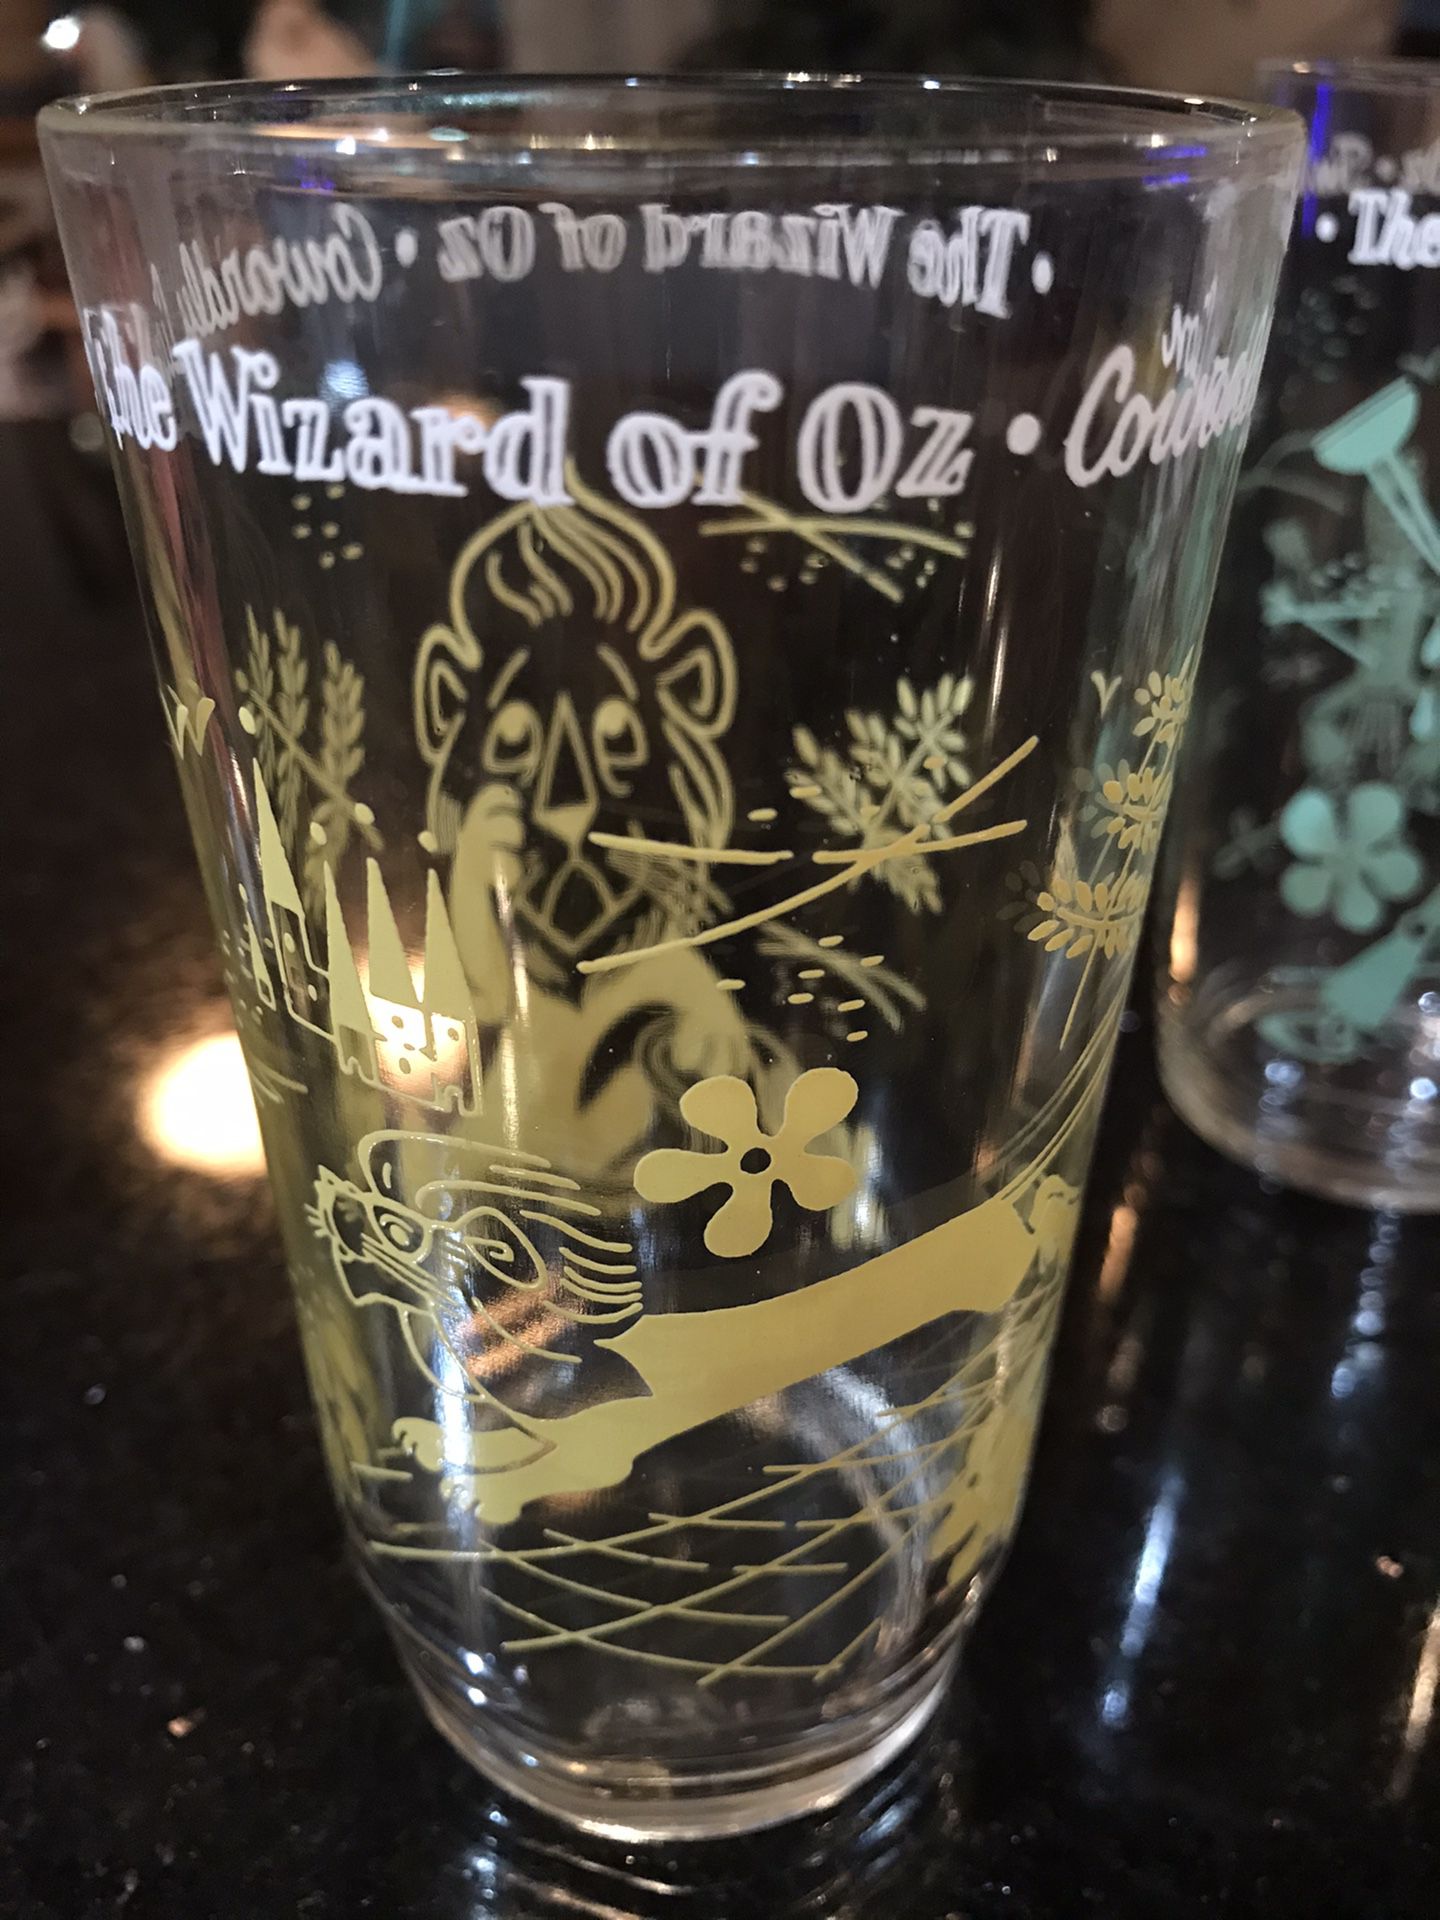 Vintage Wizard of Oz drinking glasses from 1950s